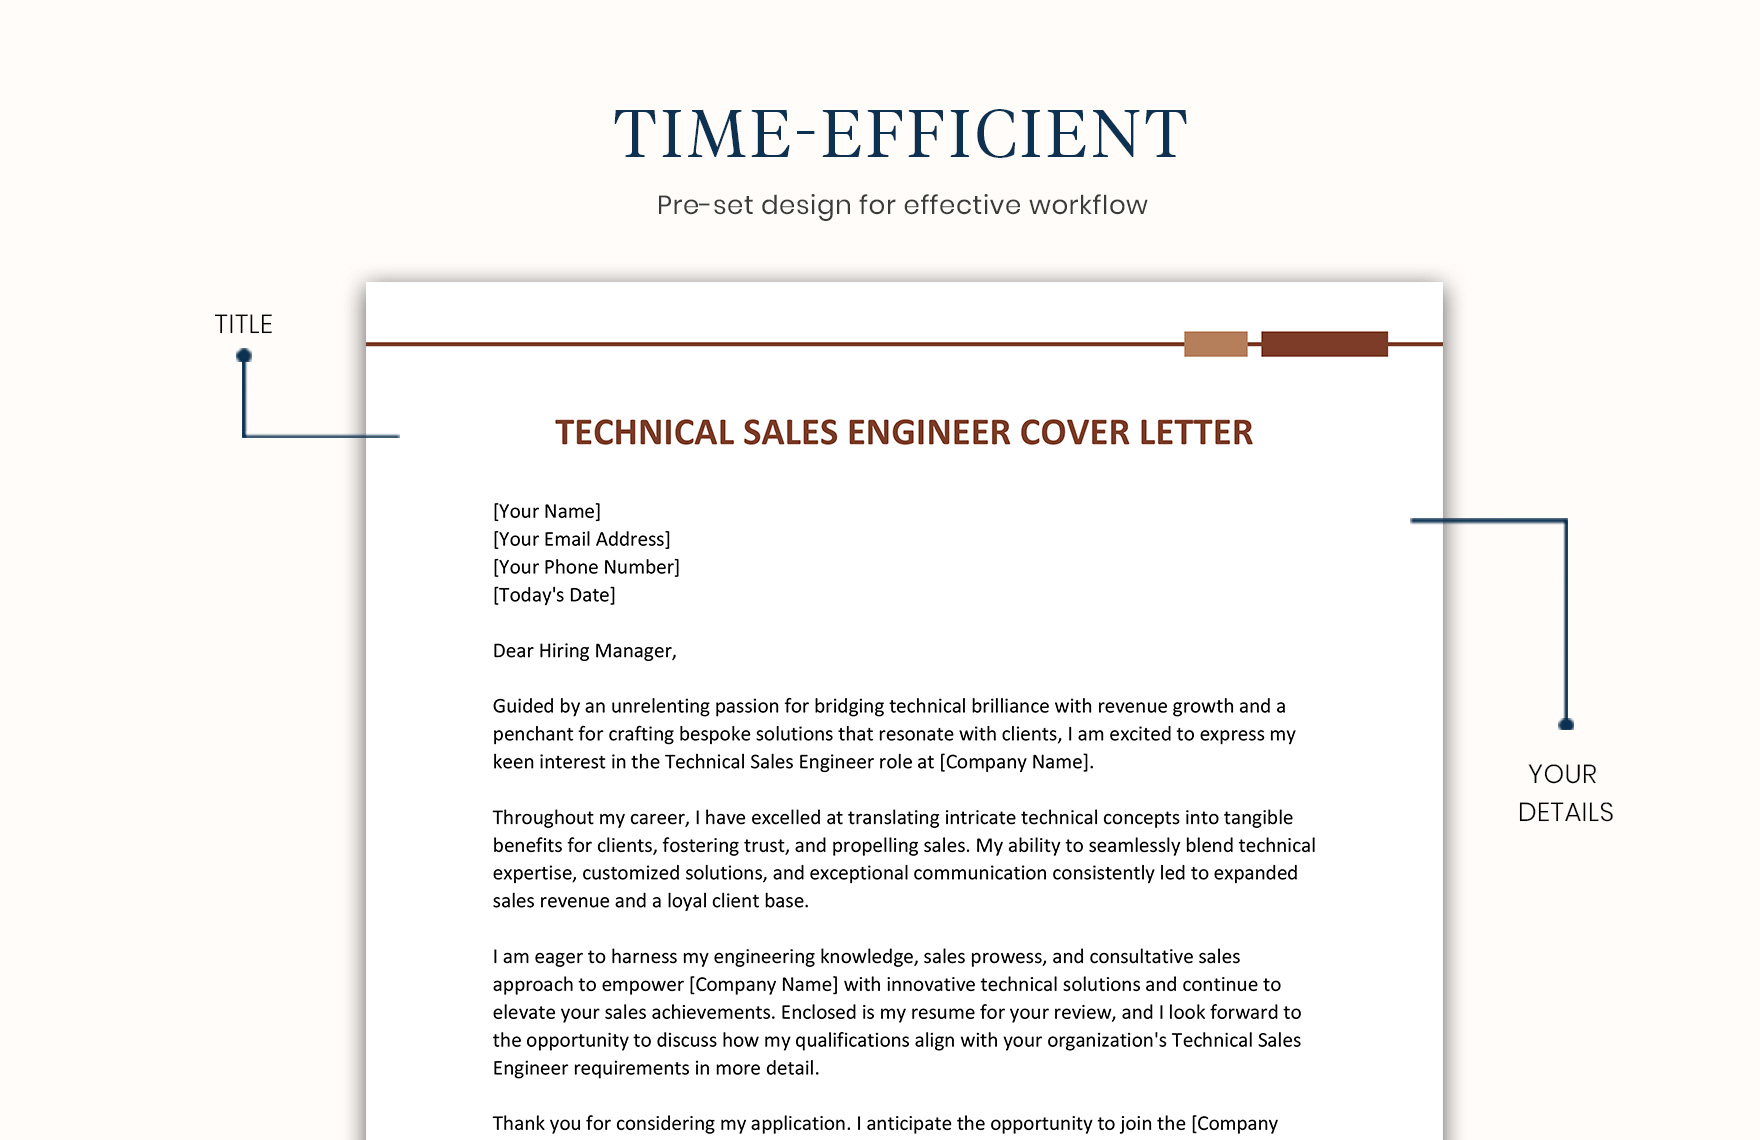 Technical Sales Engineer Cover Letter